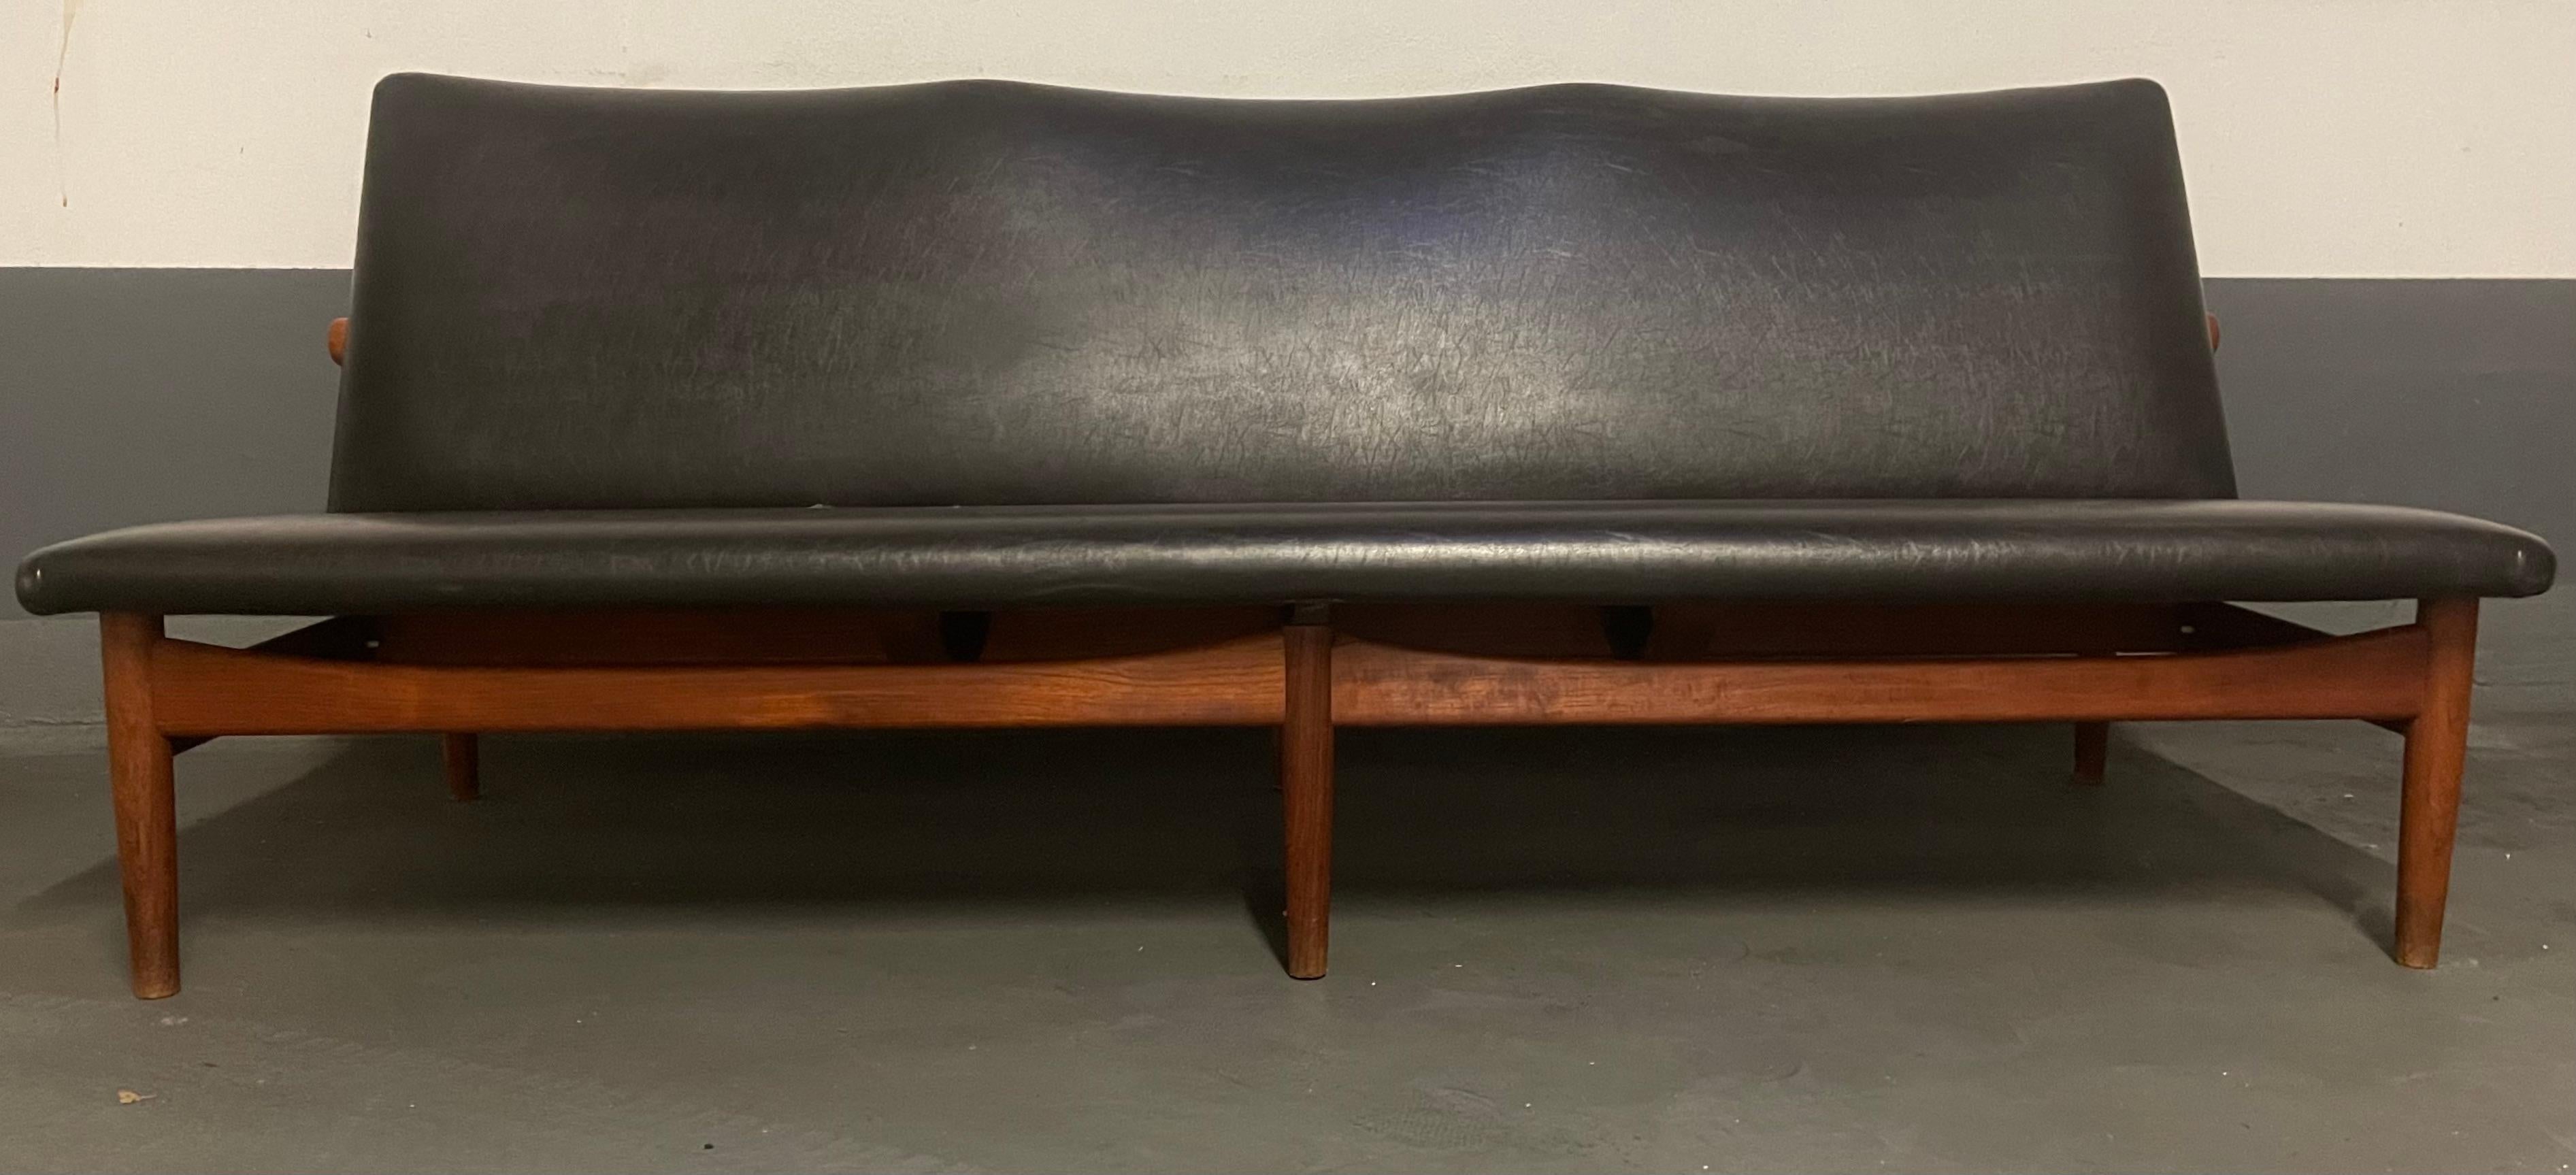 Wonderful Finn Juhl japan sofa. has a small repair in the seating area. can be used as is or be re-upholstered.